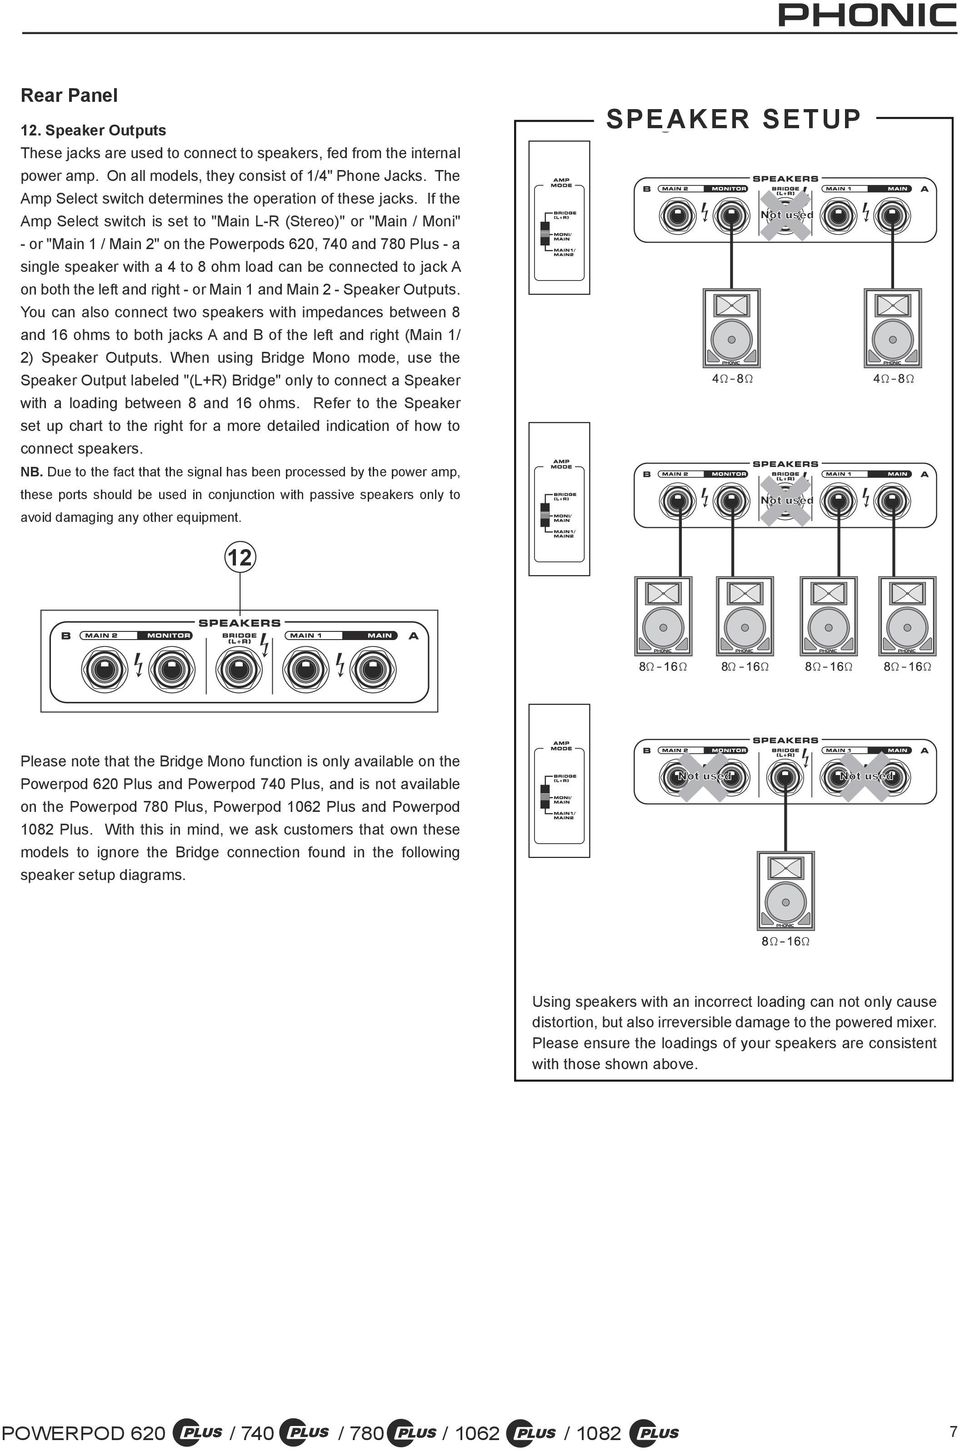 If the Amp Select switch is set to "Main L-R (Stereo)" or "Main / Moni" - or "Main 1 / Main 2" on the Powerpods 620, 740 and 780 Plus - a single speaker with a 4 to 8 ohm load can be connected to